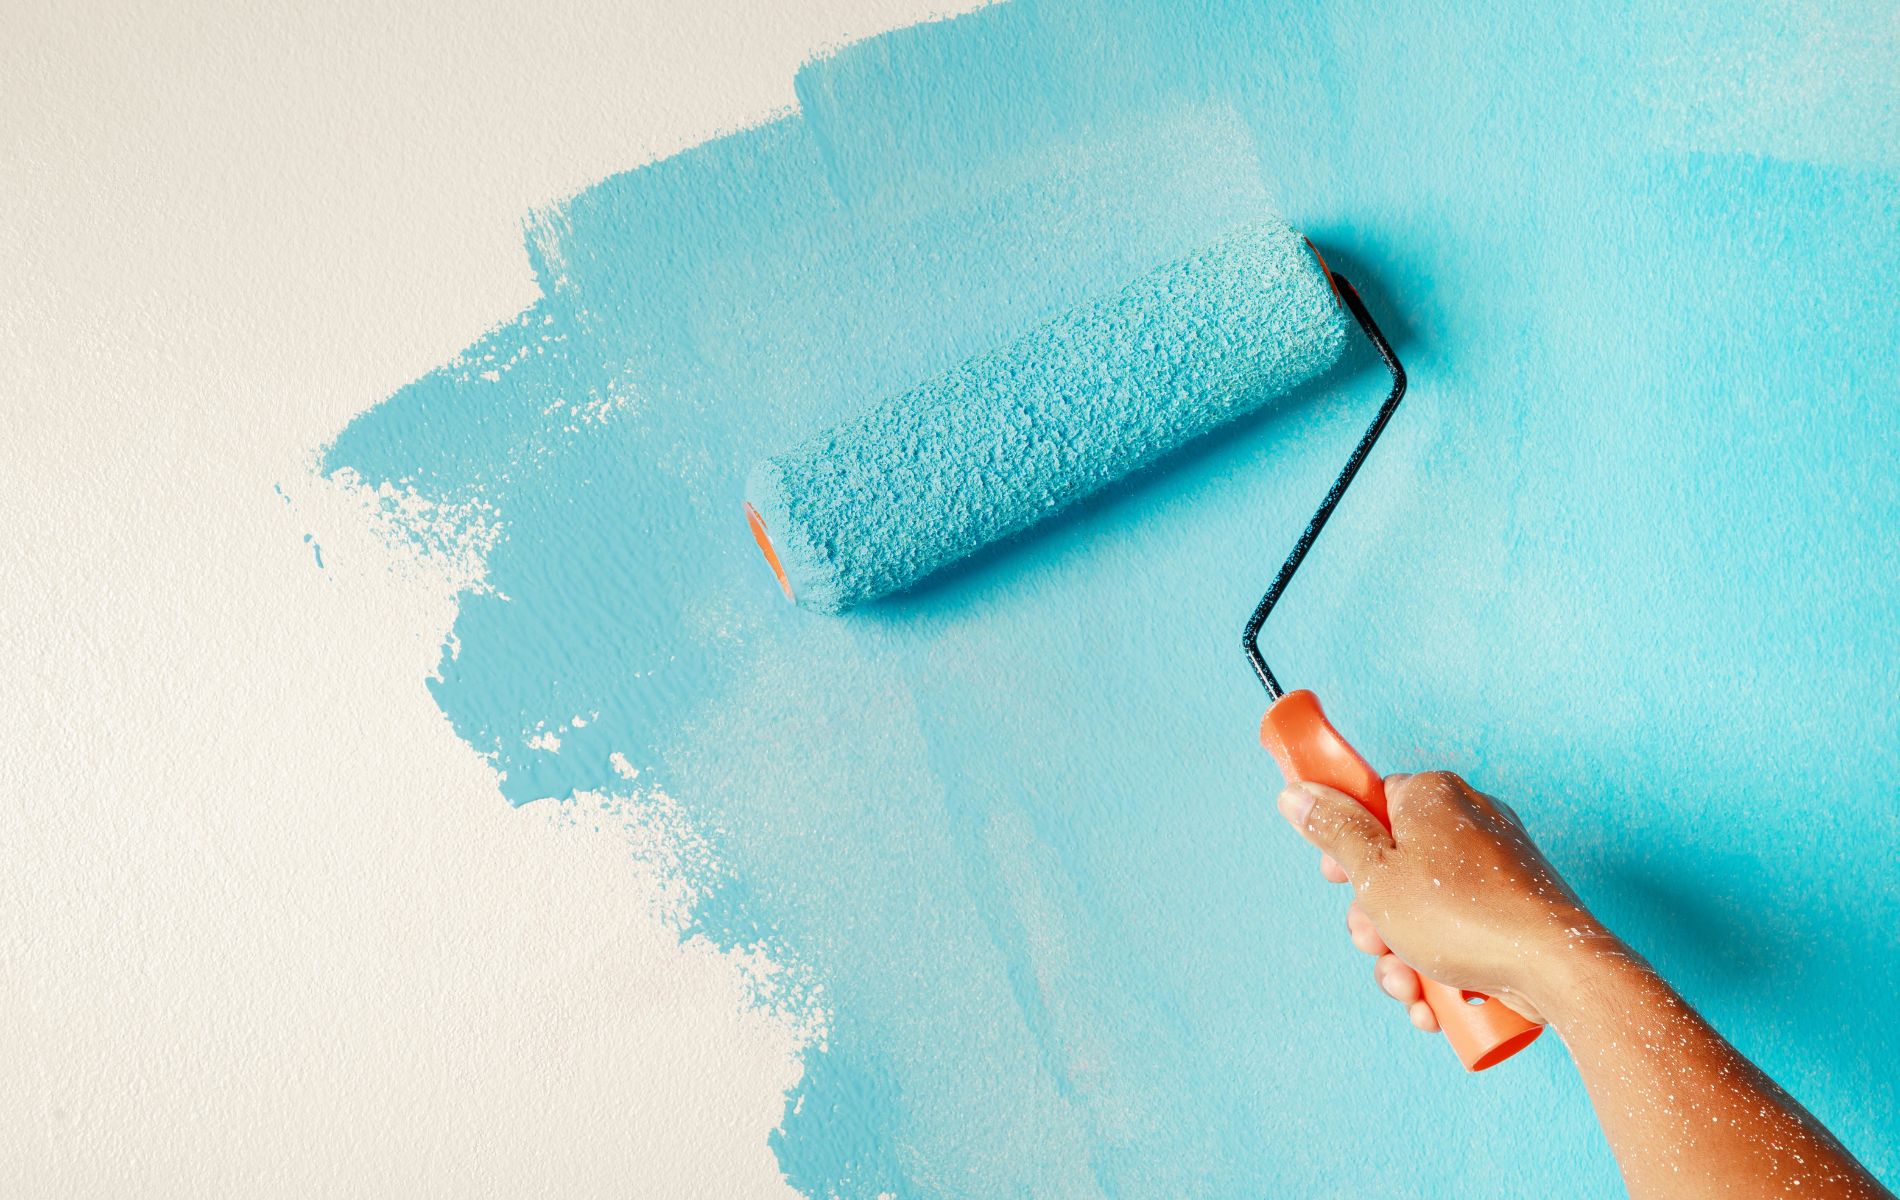 Scientists put bacteria in paint and then something special happens